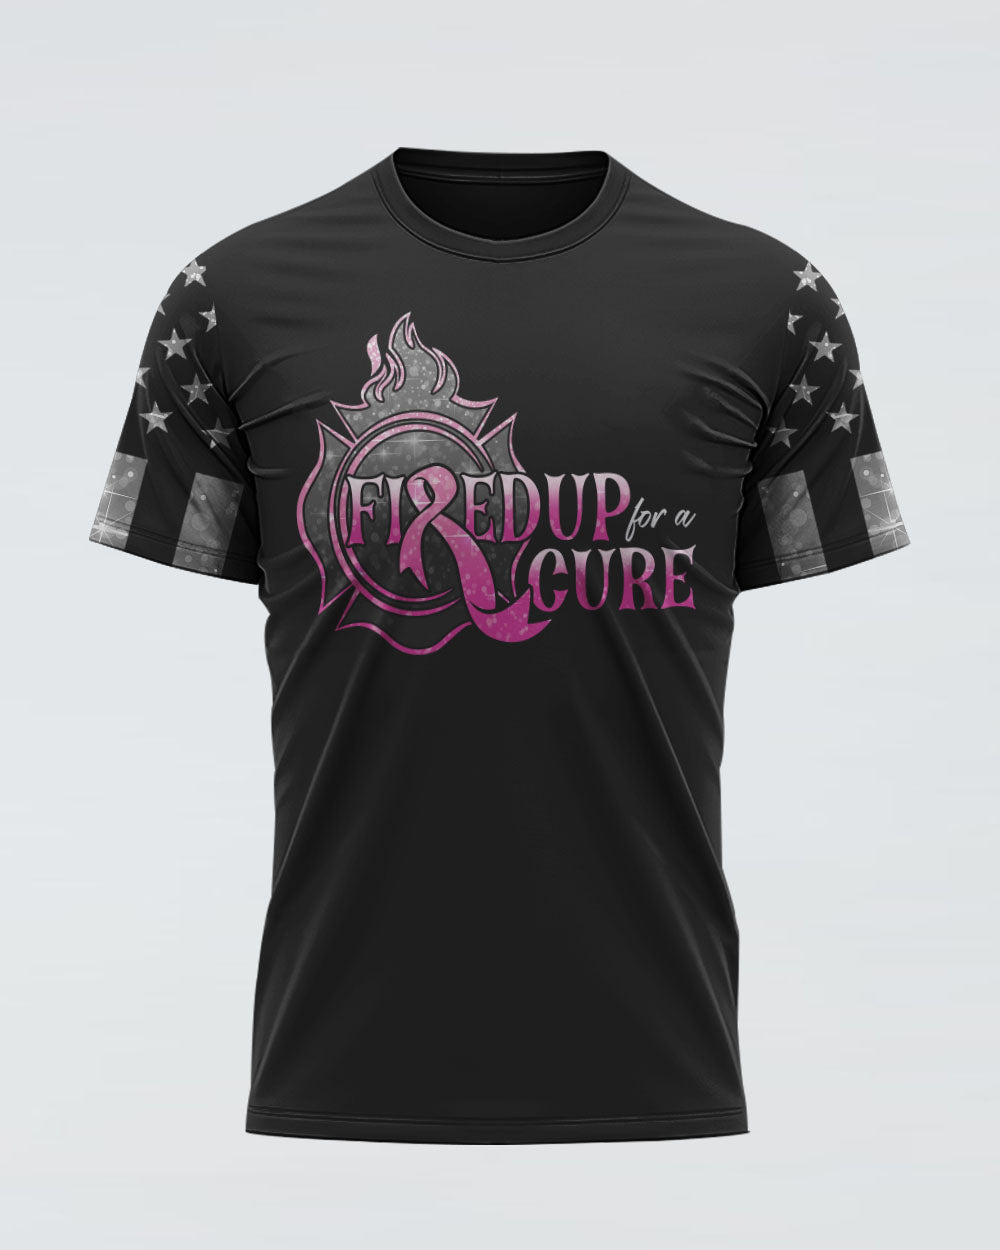 Fired Up For A Cure Flag Women's Breast Cancer Awareness Tshirt